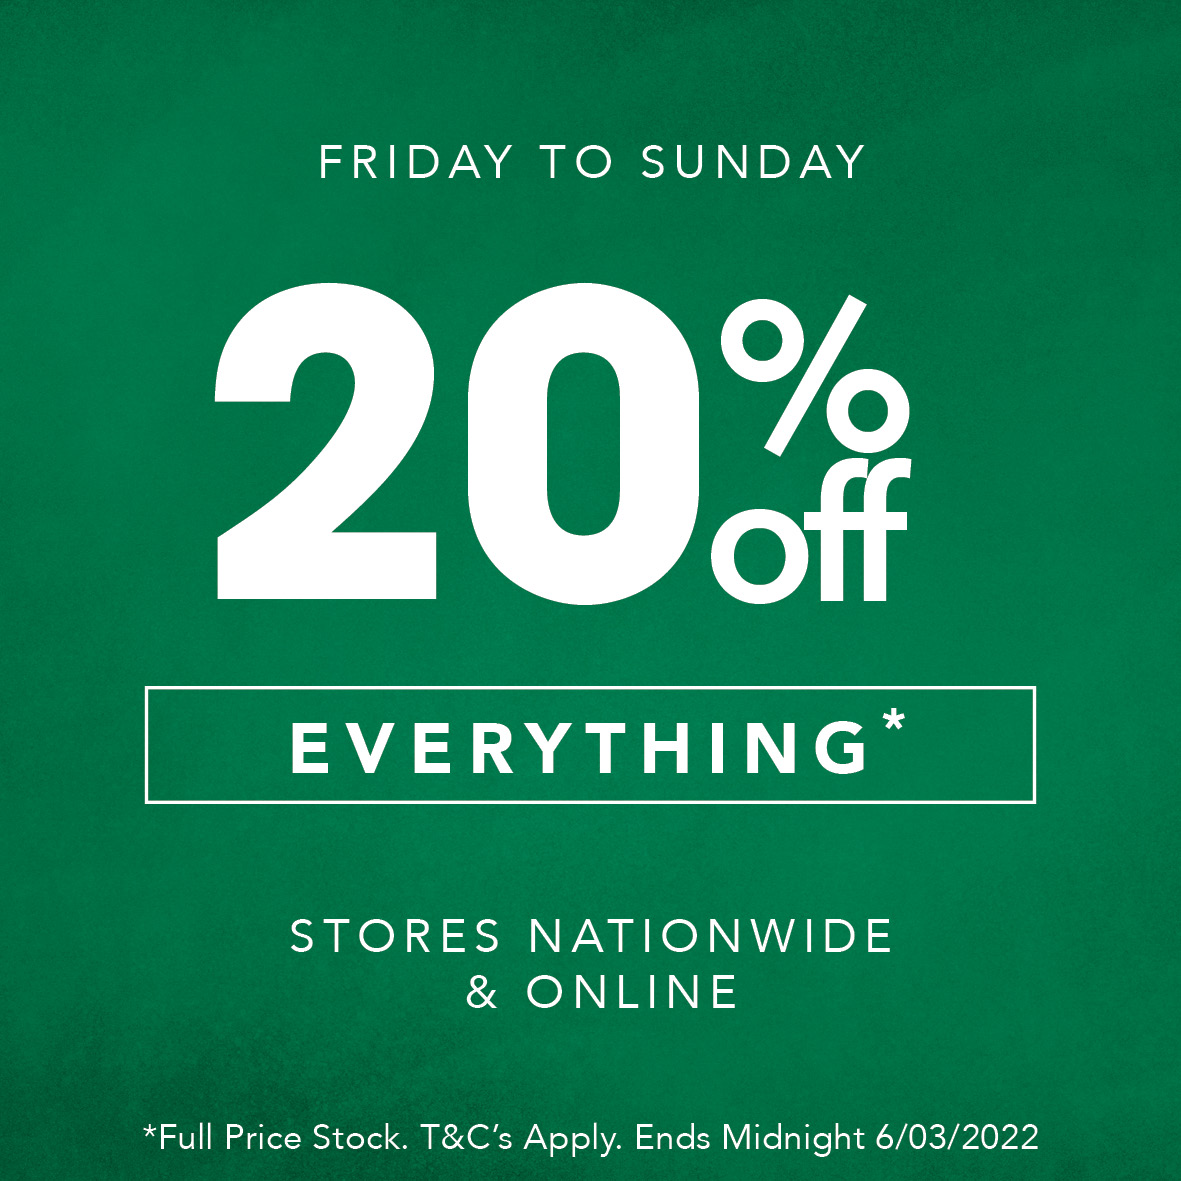 Carraig Donn’s 20% OFF Shopping Event is here!